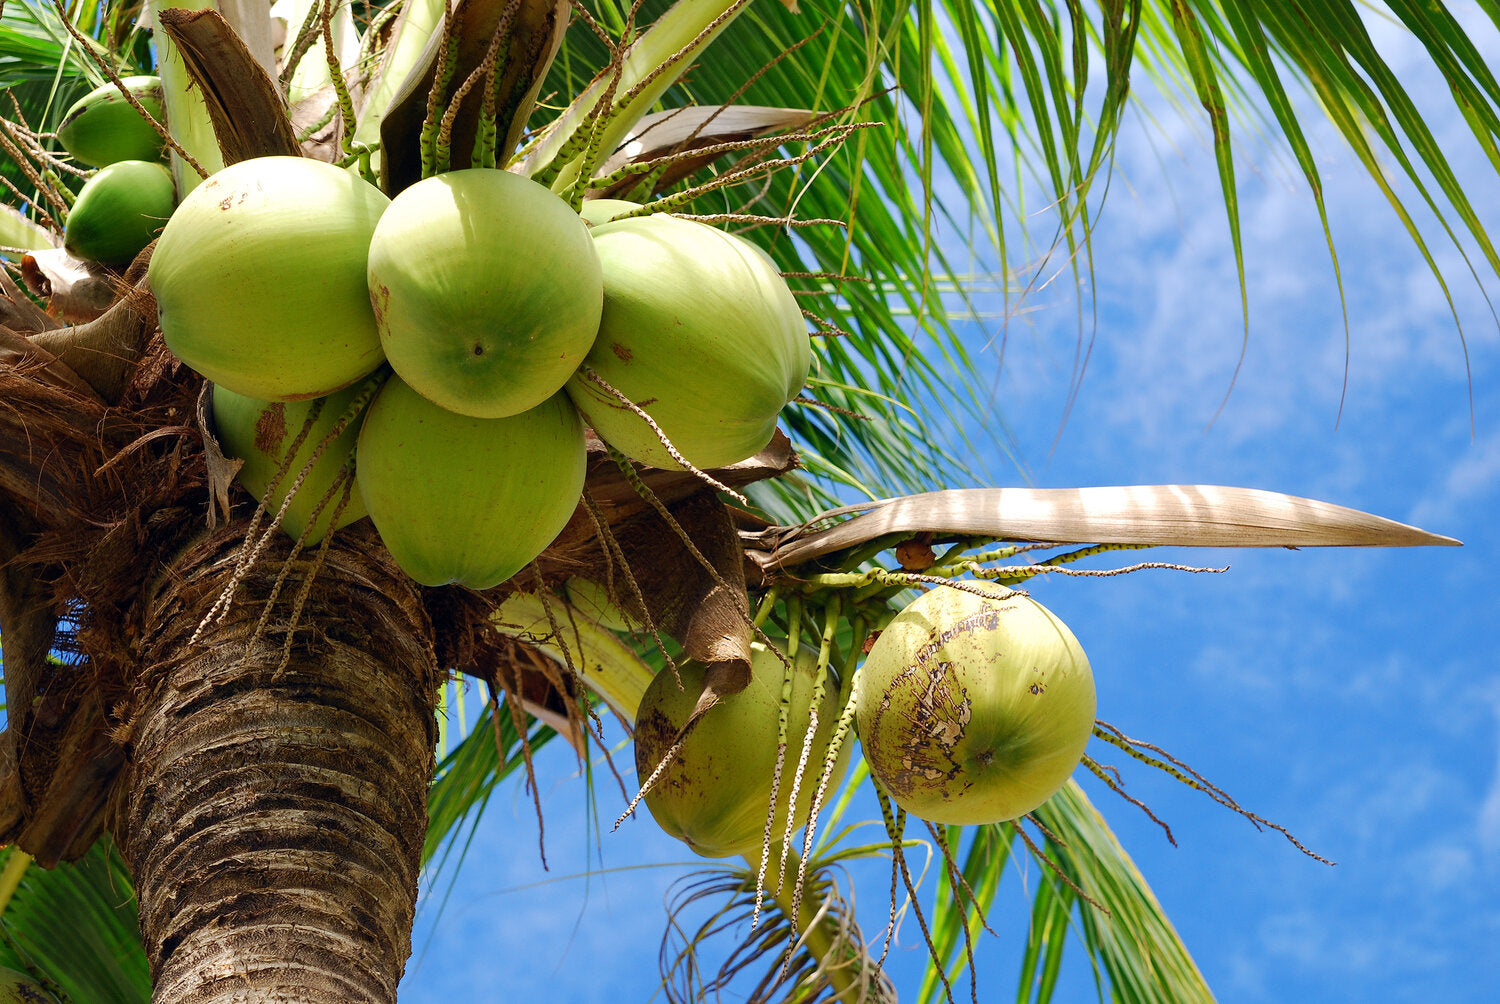 Coconut Tree - A photo of a coconut tree, typically featuring a tall palm tree with a slender trunk, feathery fronds, and a crown of large, elongated leaves. The tree produces large, oval-shaped coconuts with a hard, brown outer shell and a fibrous husk. The coconut fruit contains a delicious, refreshing water inside and a rich, creamy flesh known as "copra."